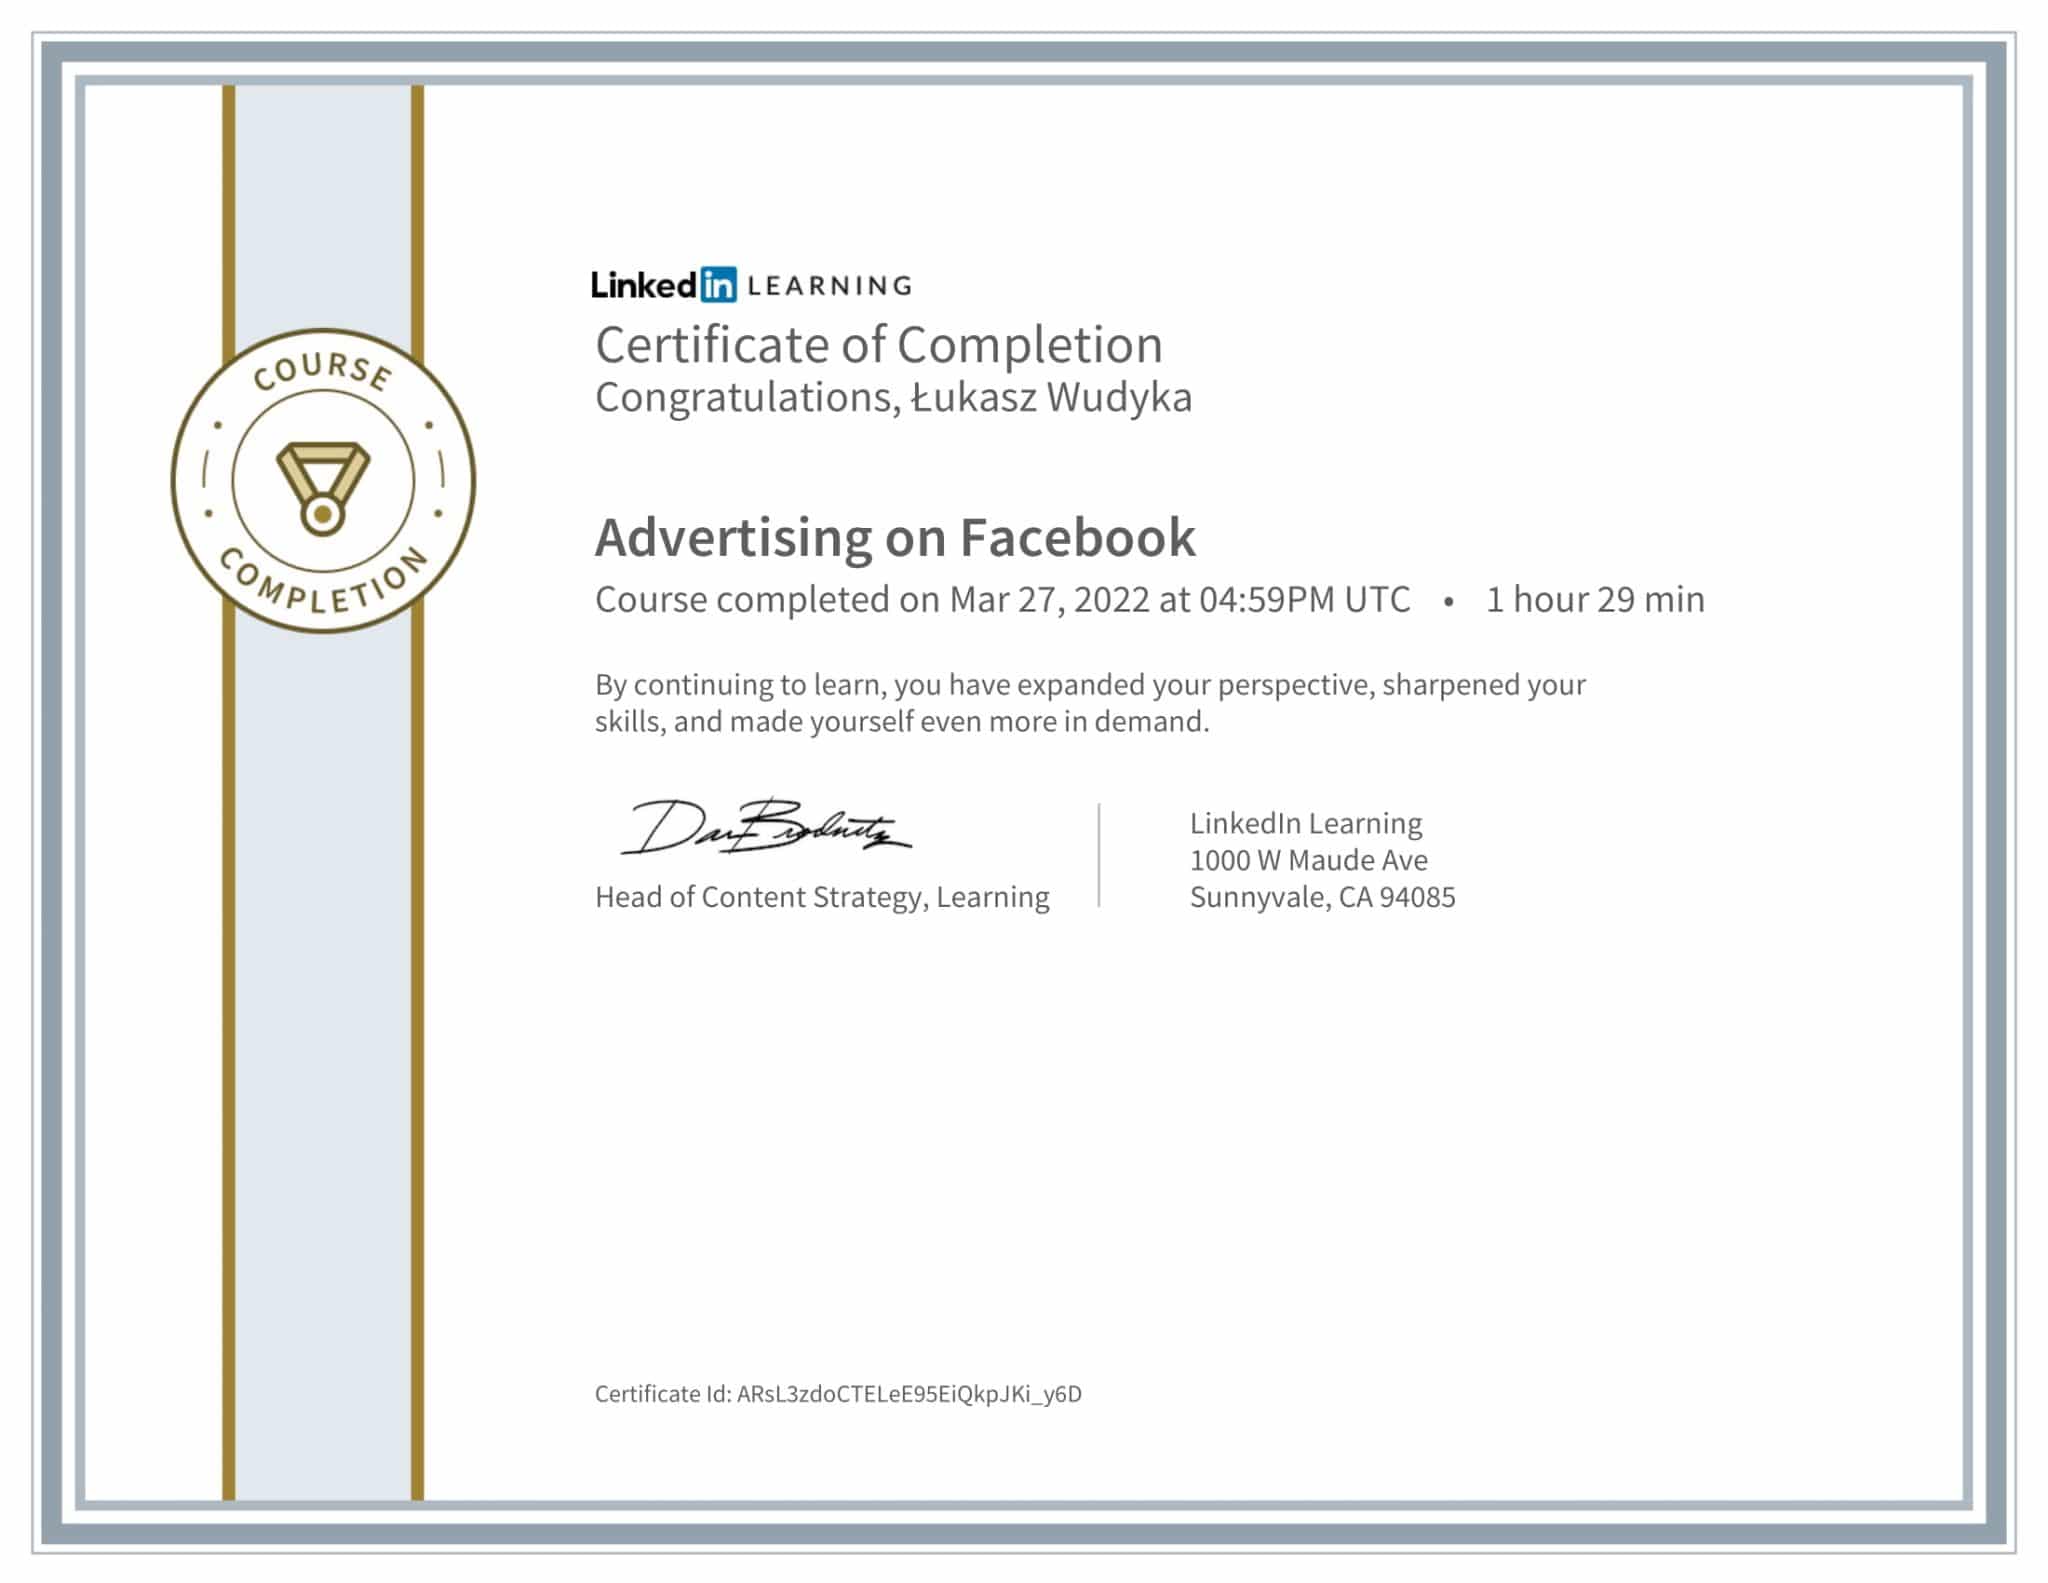 CertificateOfCompletion_Advertising on Facebook-1